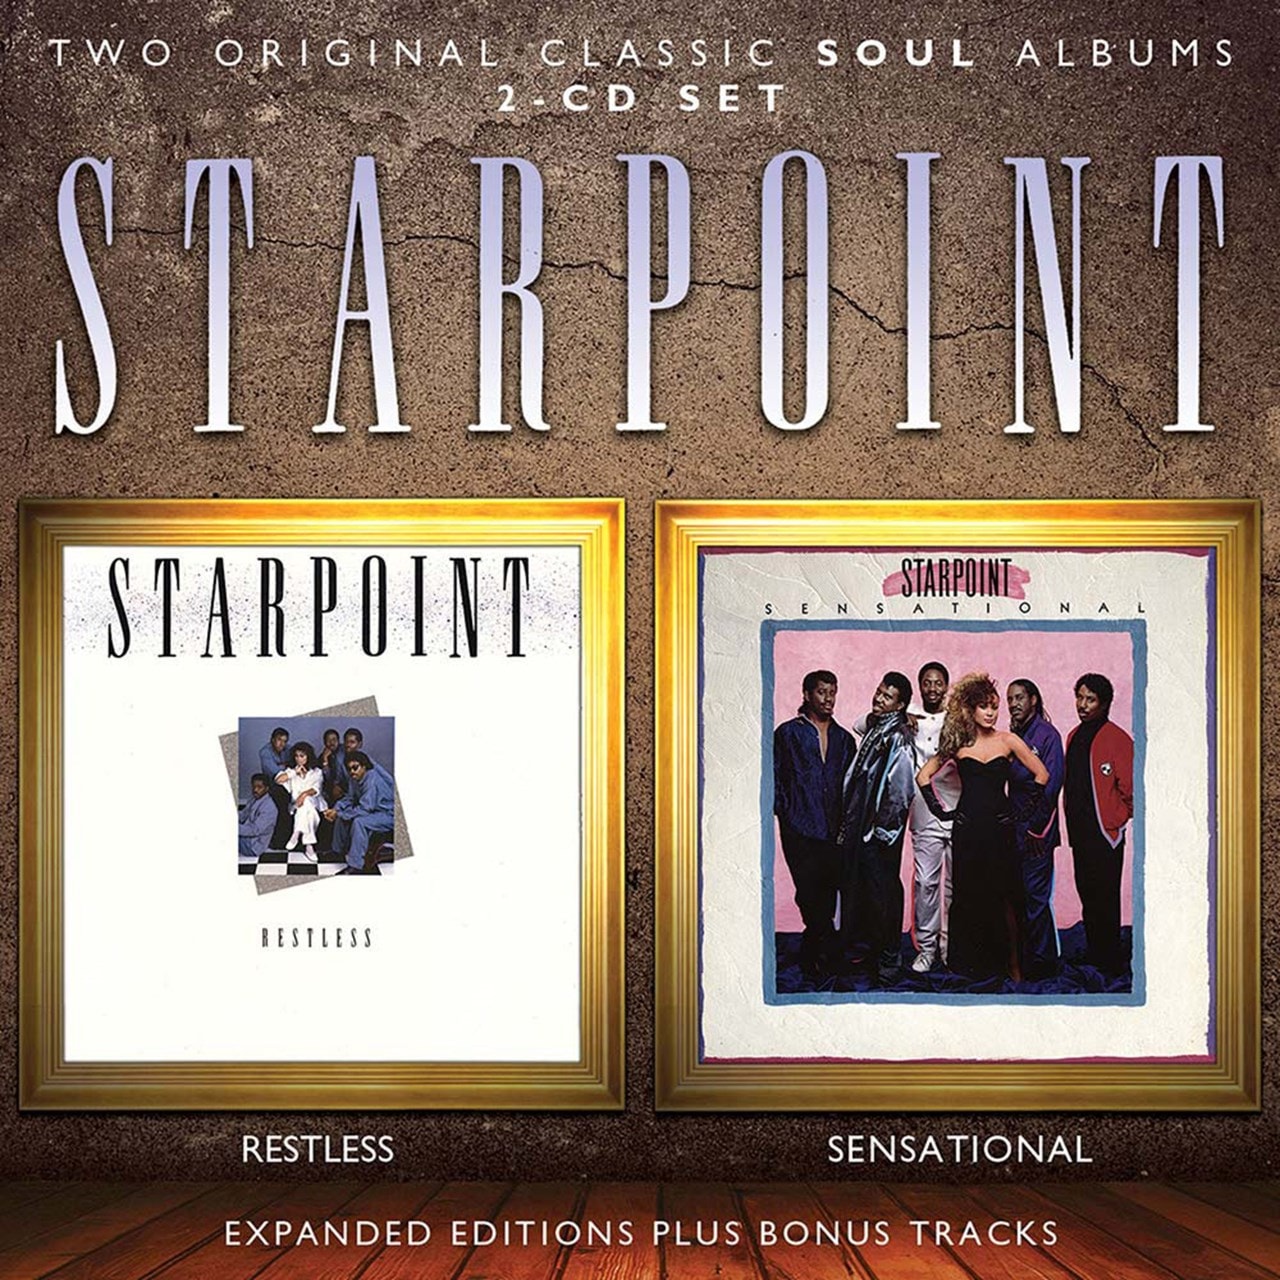 Soul albums. Restless. Object of my Desire Starpoint. Restless - 1985 - we Rock the Nation.